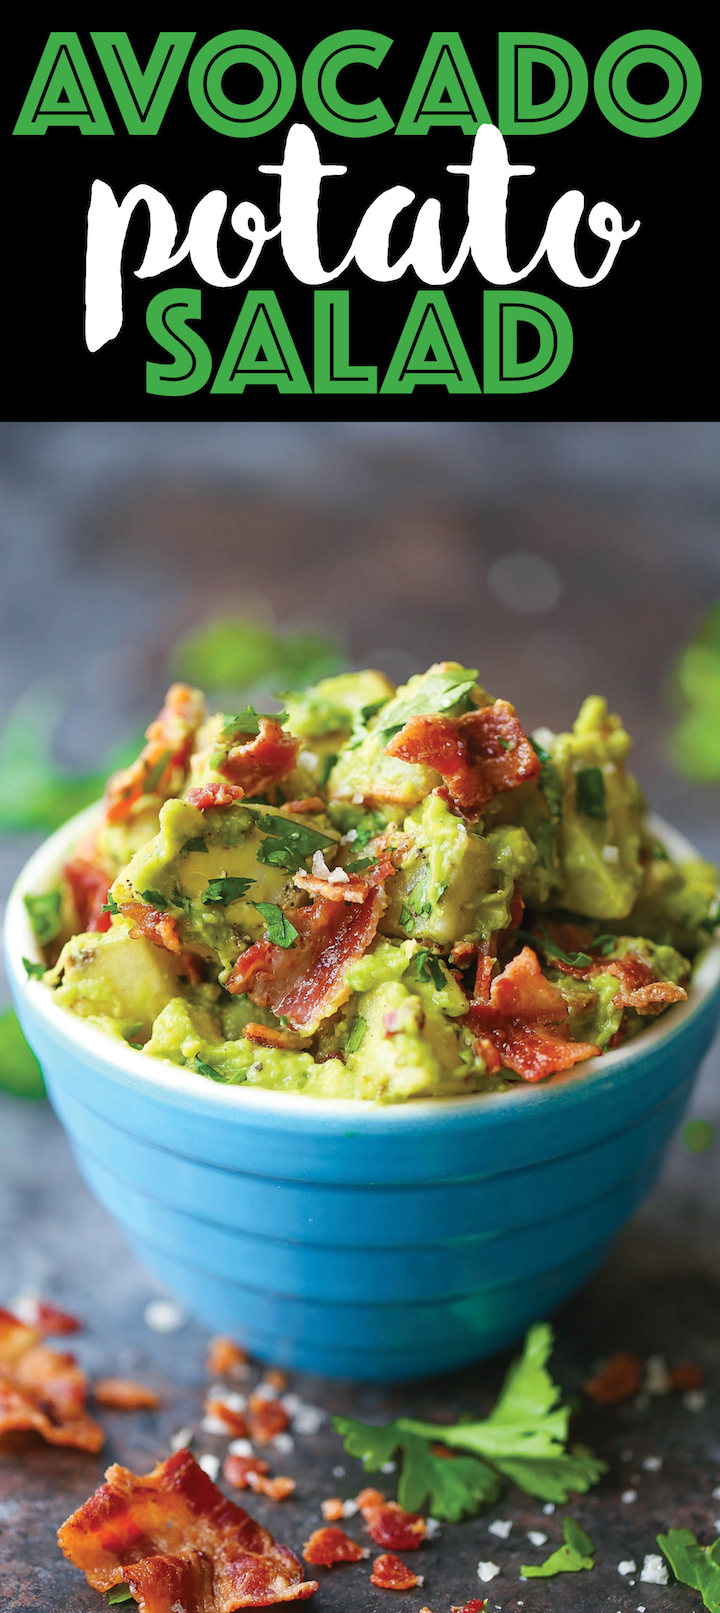 Avocado Potato Salad - The BEST potato salad hands down! A crowd-favorite that's so creamy using fresh avocado and NO MAYO. It's healthier and tastier! WIN!